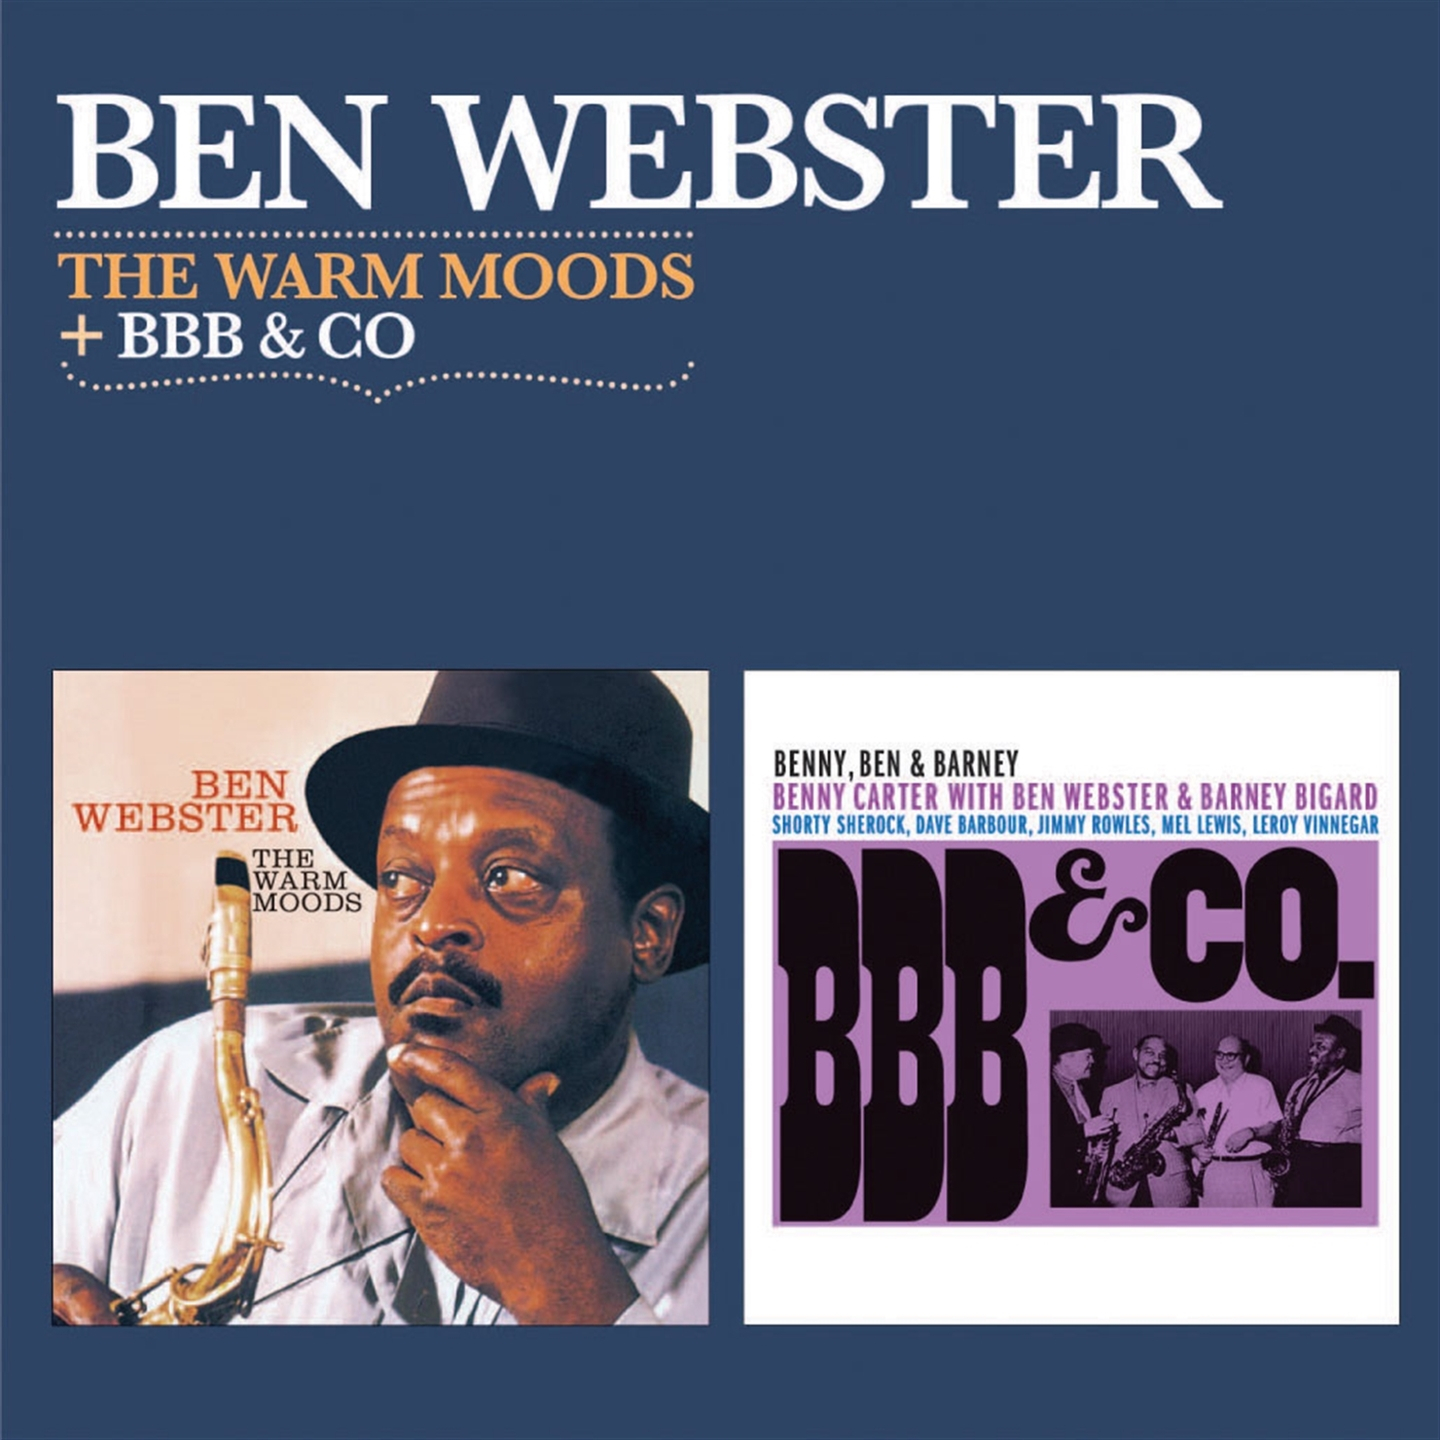 THE WARM MOODS (+ BBB & CO)